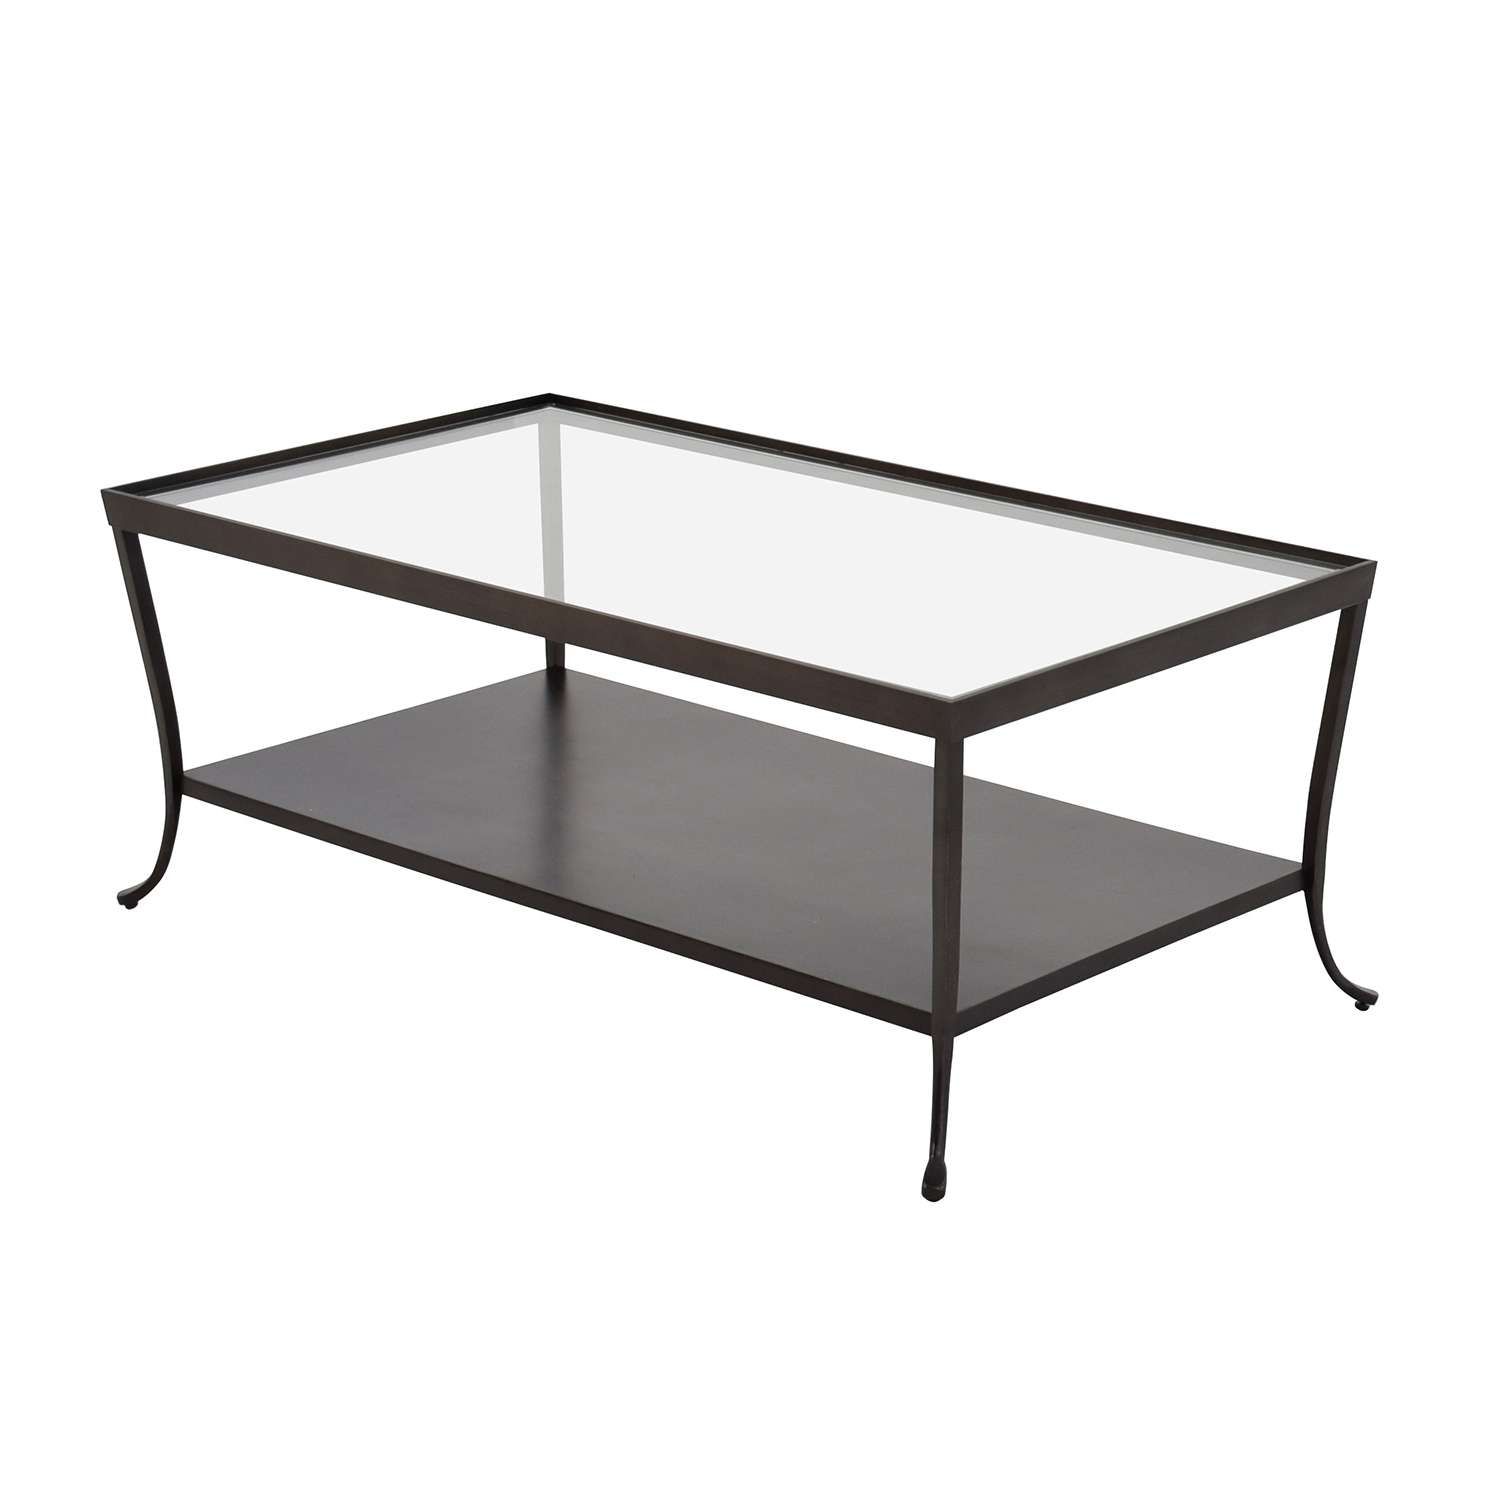 Preferred Metal Coffee Tables With Glass Top With Iron Glass Coffee Table Tags : Awesome Glass Top Coffee Table With (View 4 of 20)